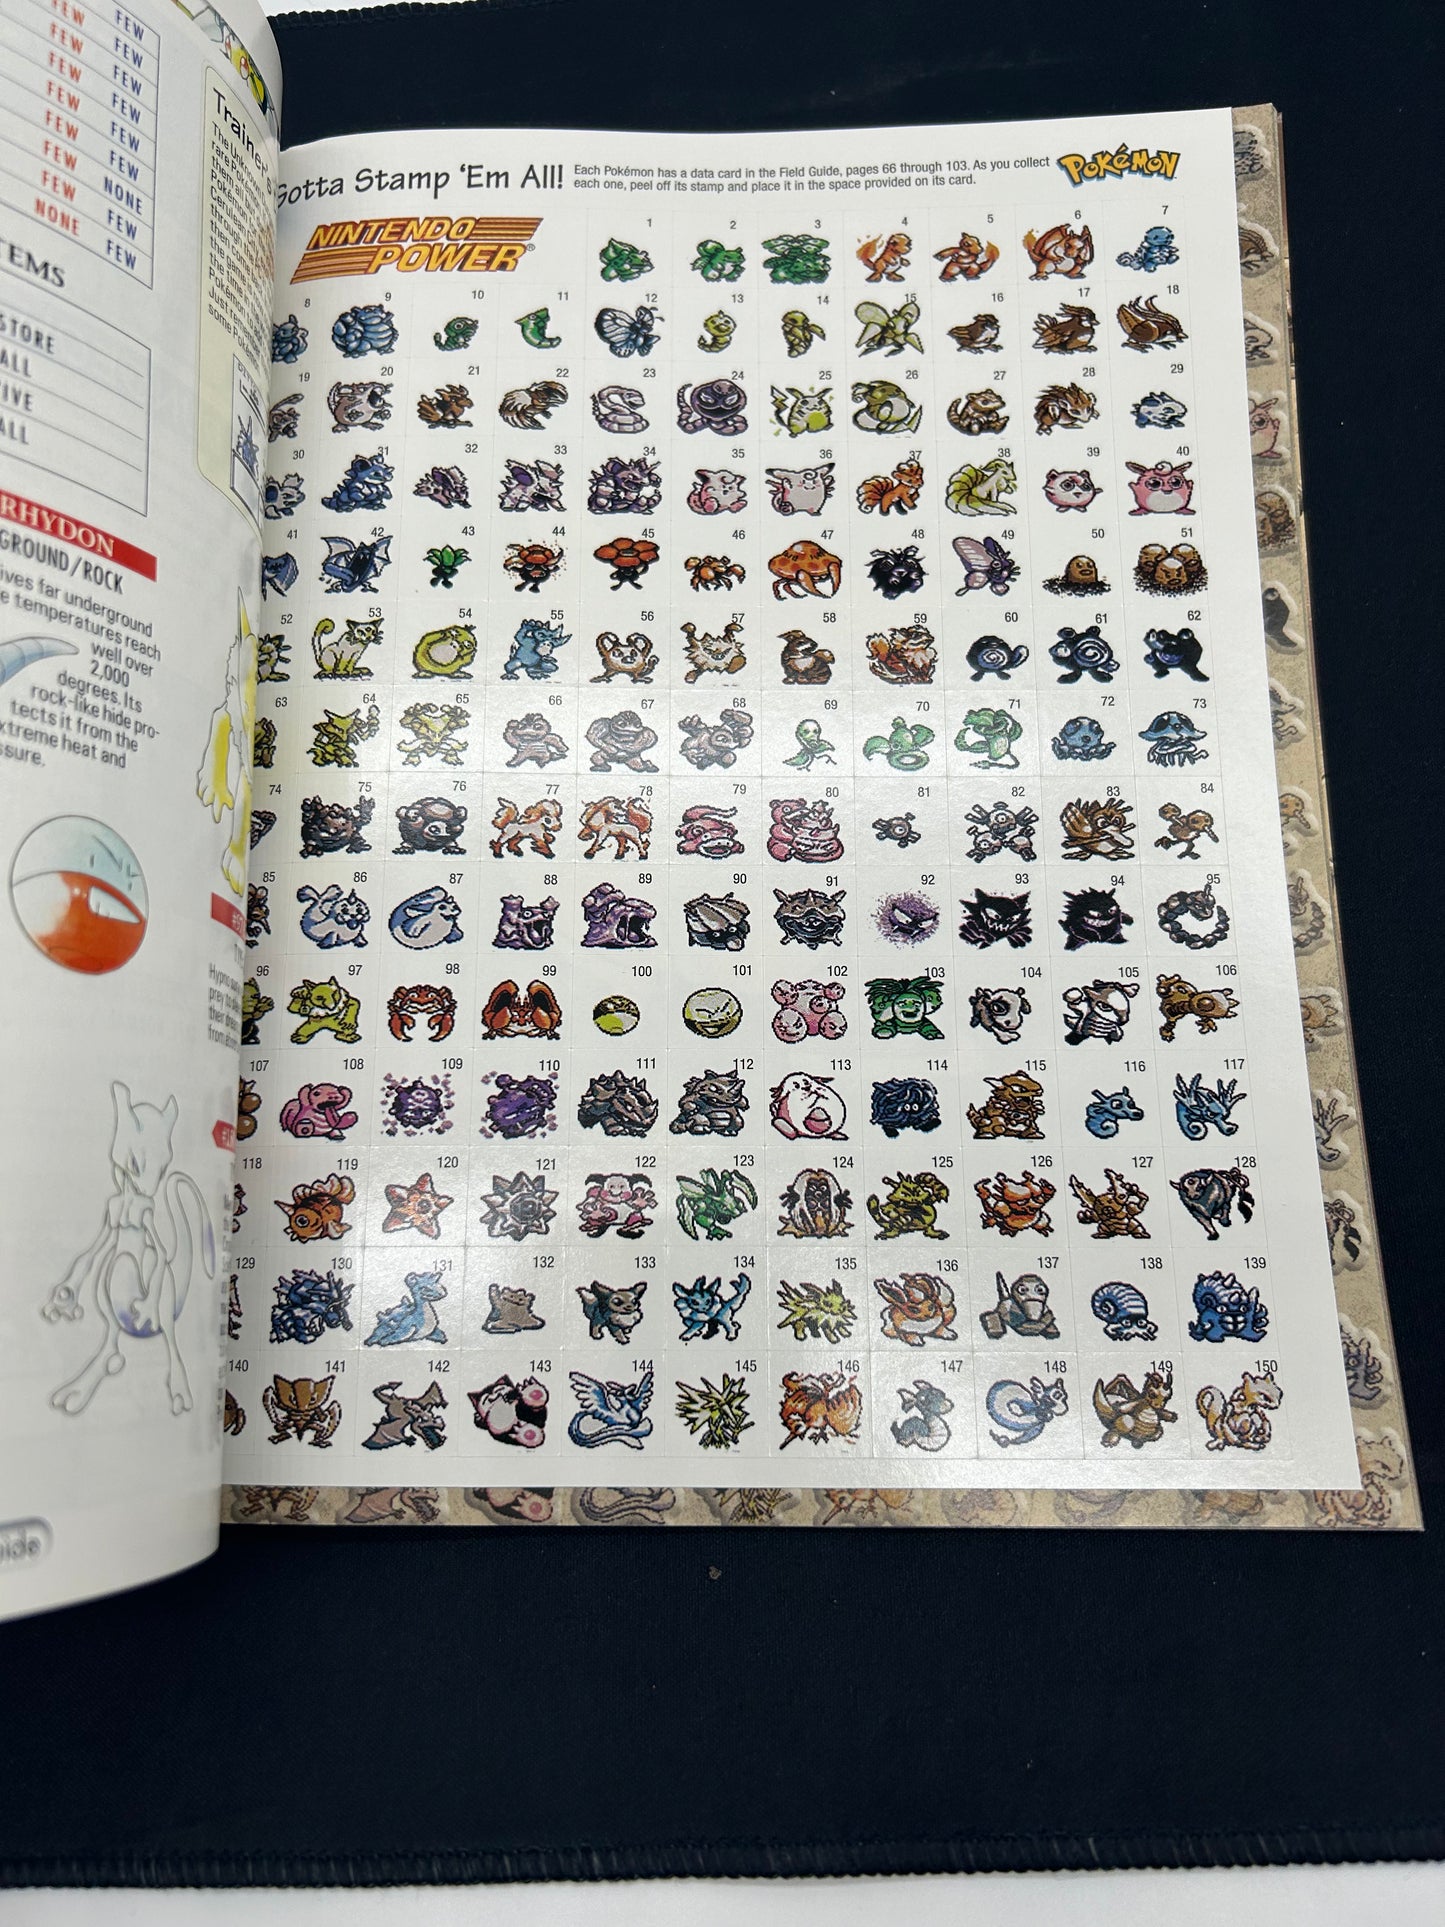 Old pokemon players guide auction *with full stamp insert still!!*